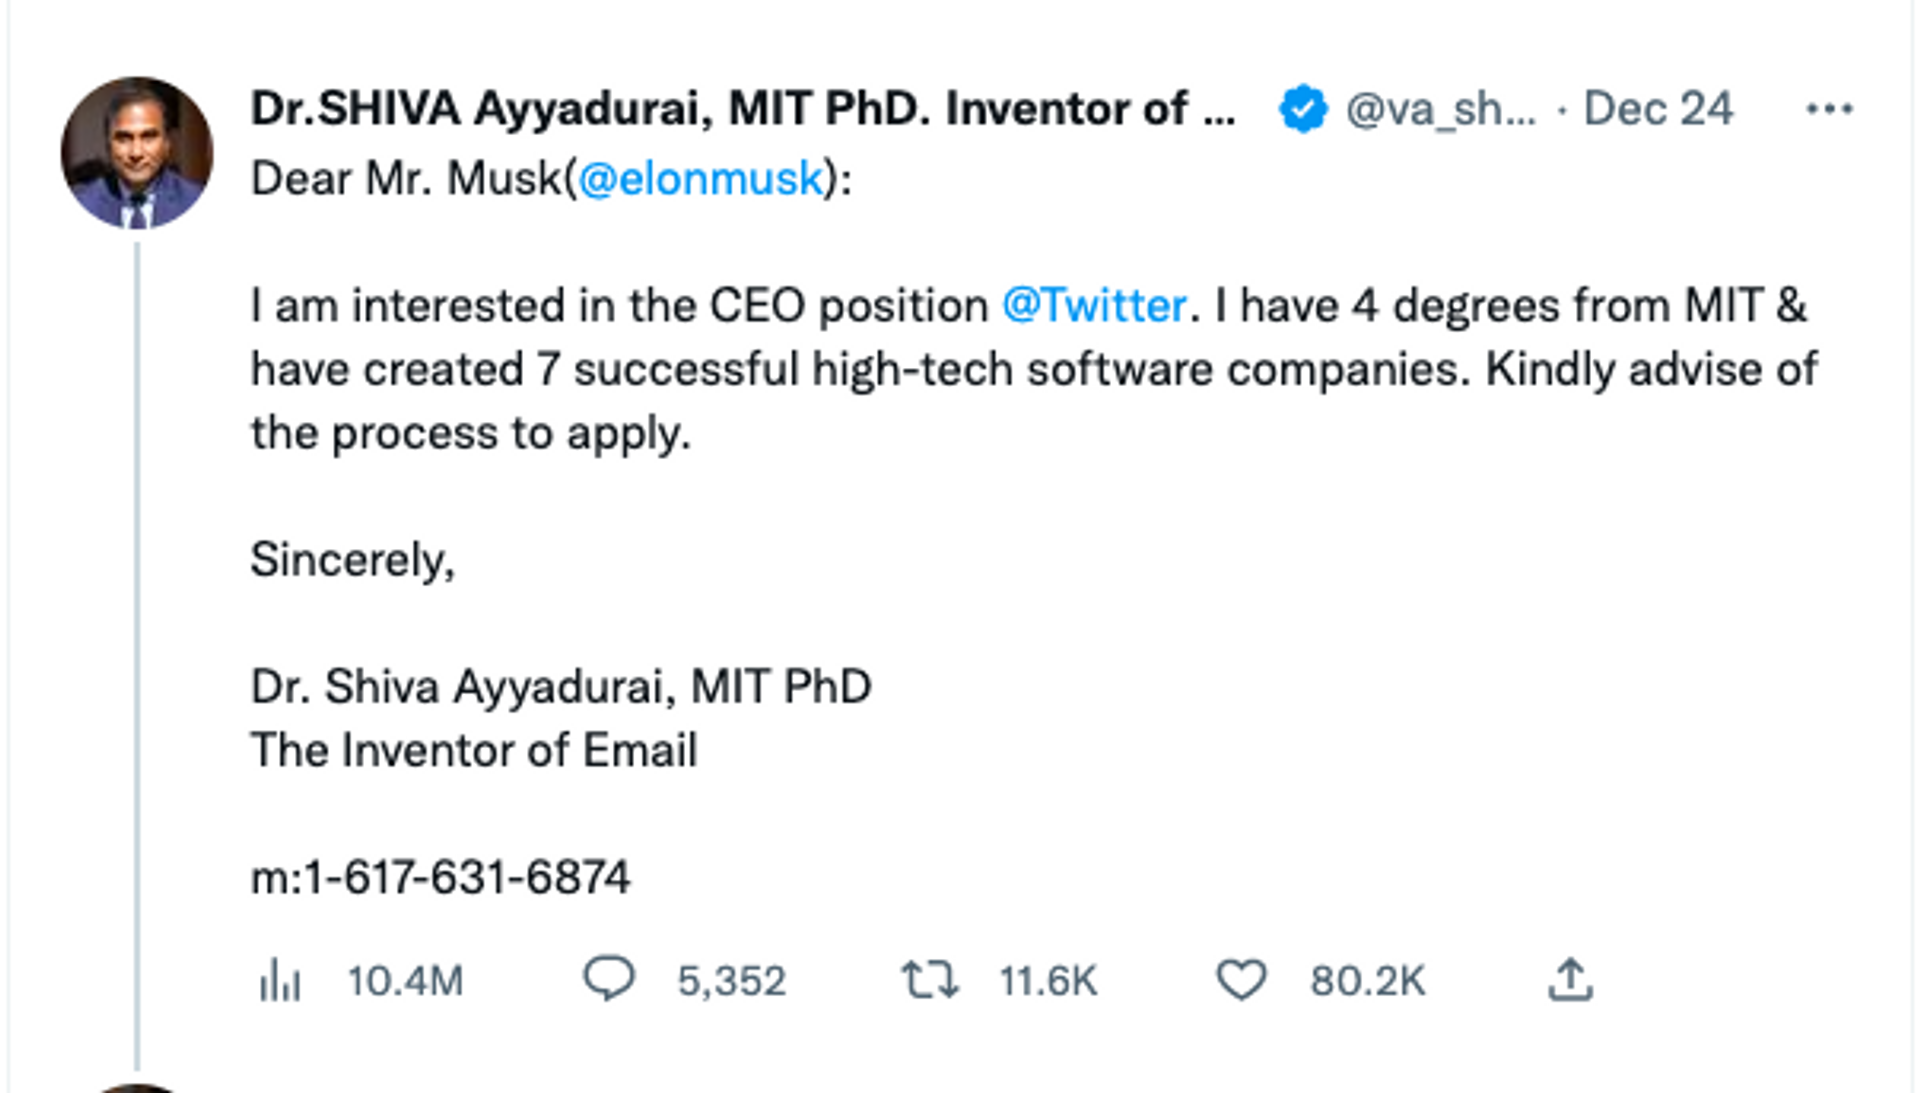 Indian-American MIT scholar Shiva Ayyadurai showing his interest to appointed as Twitter CEO - Sputnik India, 1920, 27.12.2022